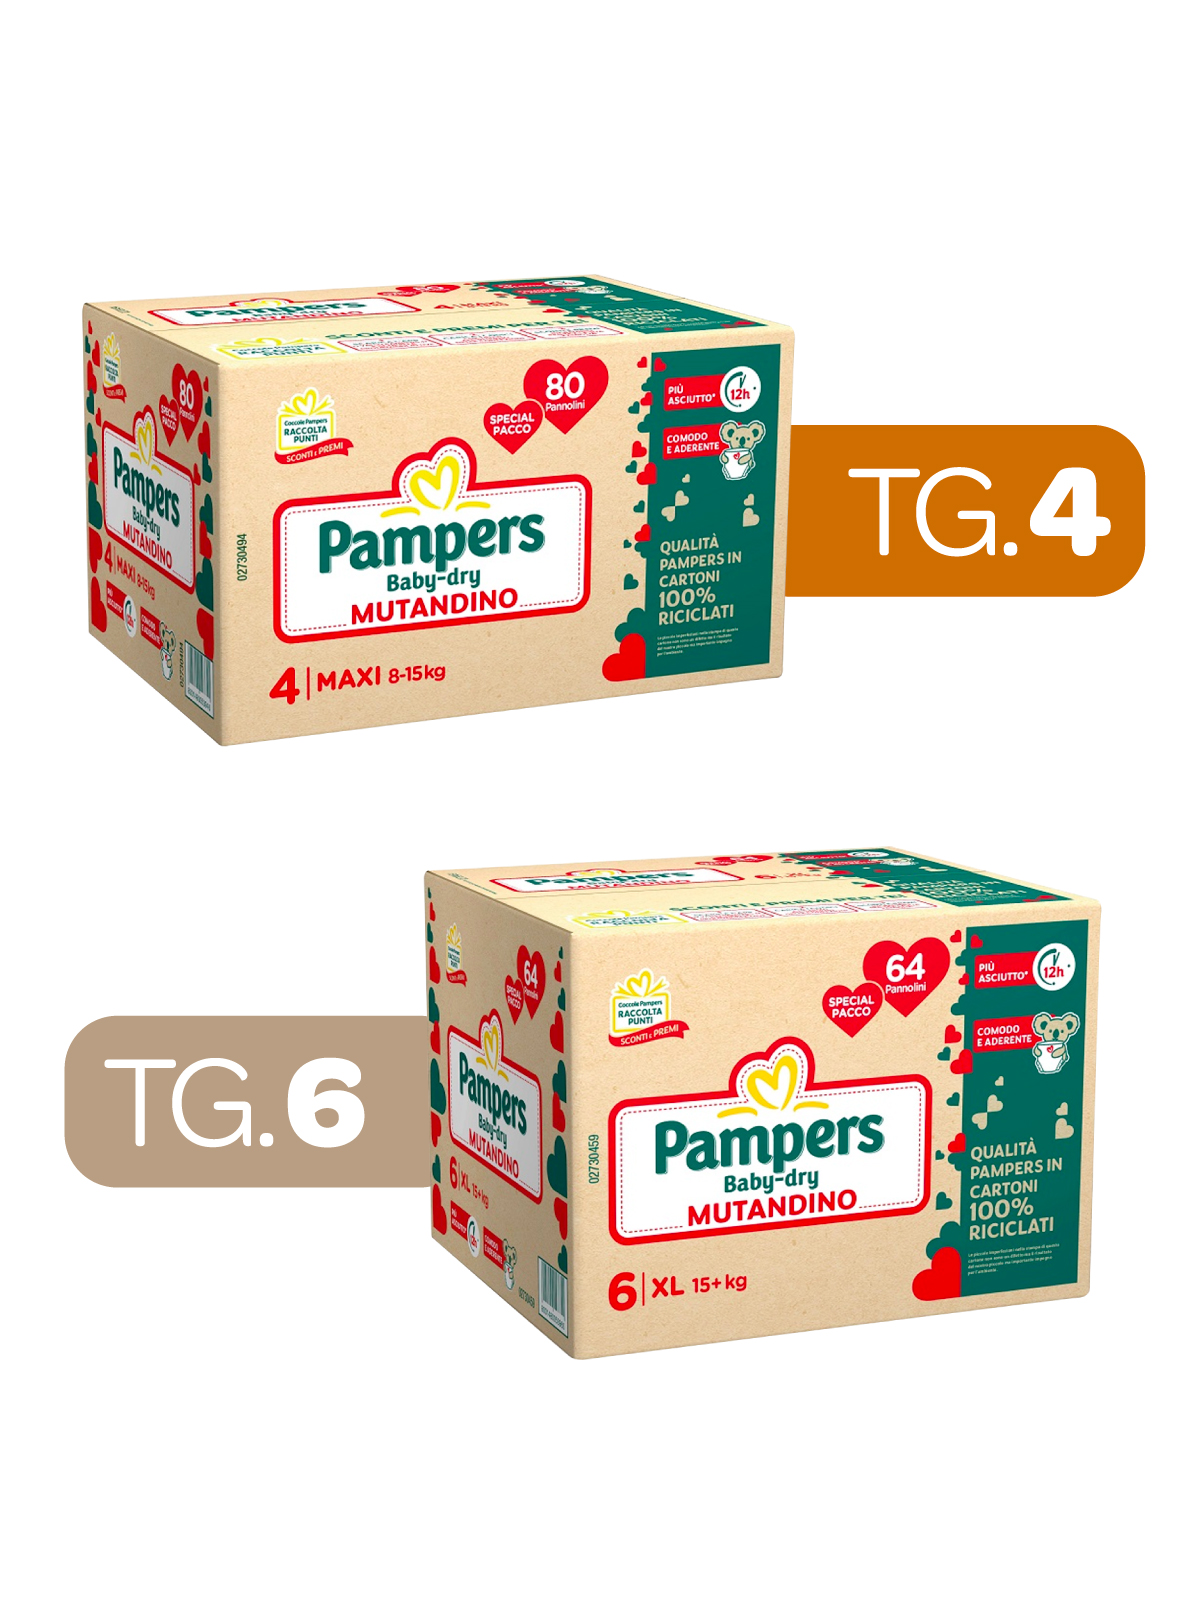 Pampers – special pack baby dry mutandino maxi taglia 4 (8-15 kg) – 80 pz + special pack baby dry mutandino xl taglia 6 (15+ kg) – 64 pz - 